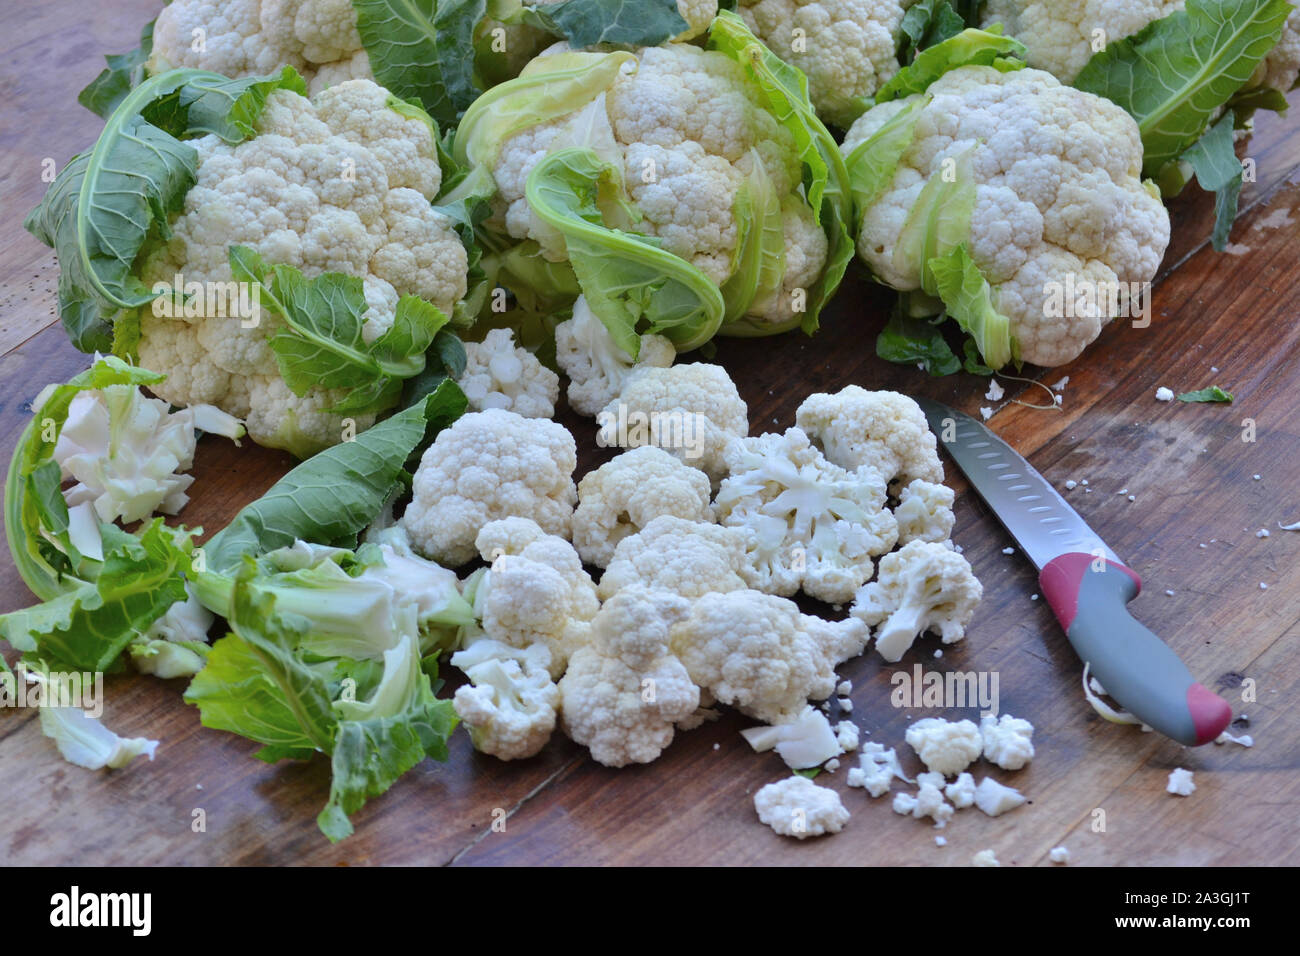 Cauliflower for pickling on a rustic wooden table.  Brassica oleracea  botrytis Stock Photo